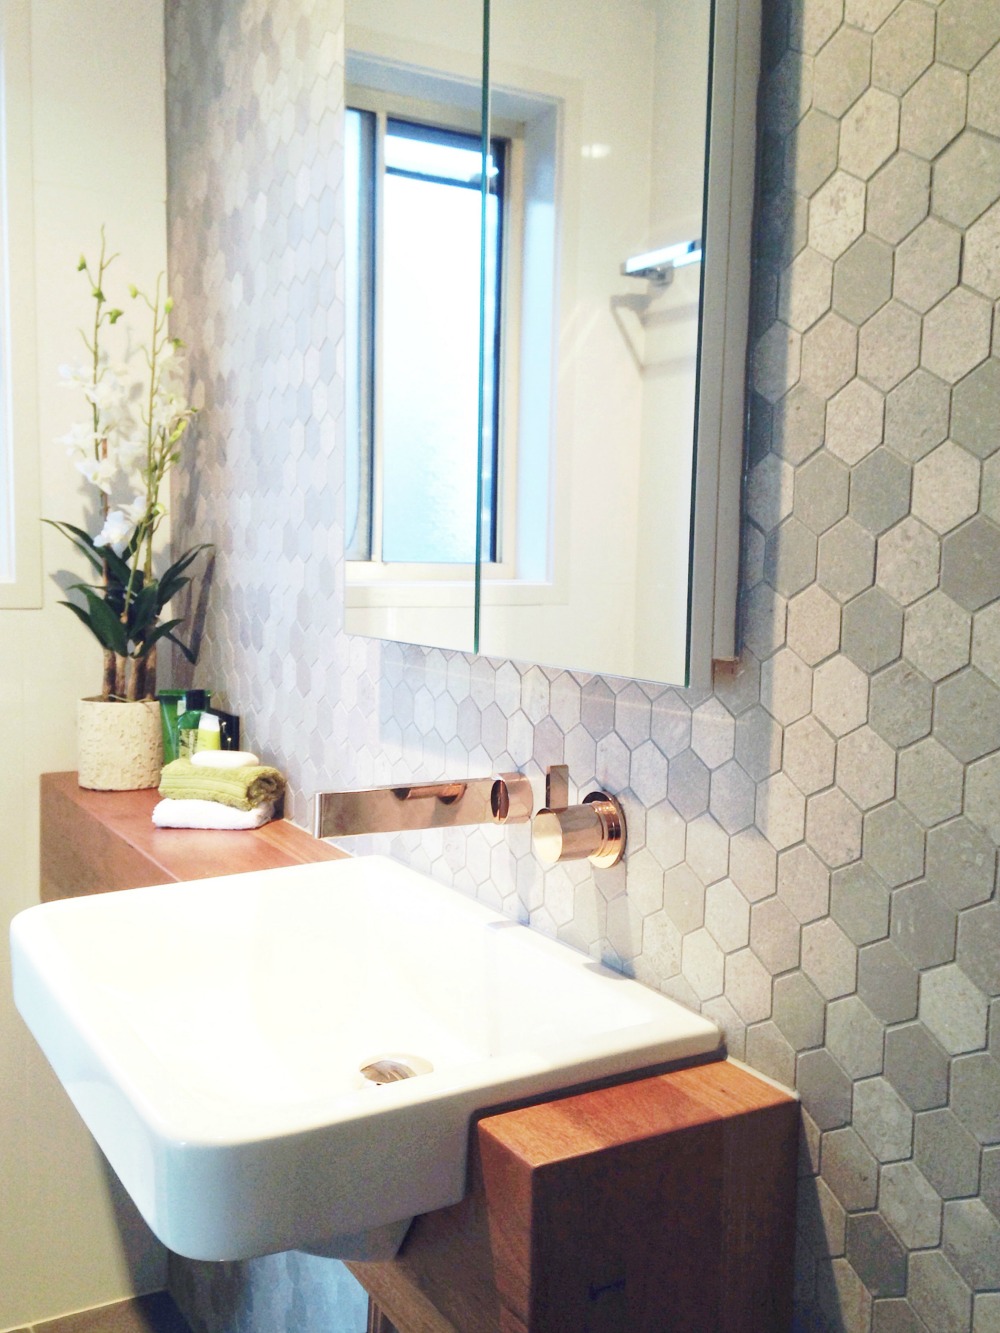 Tile feature wall